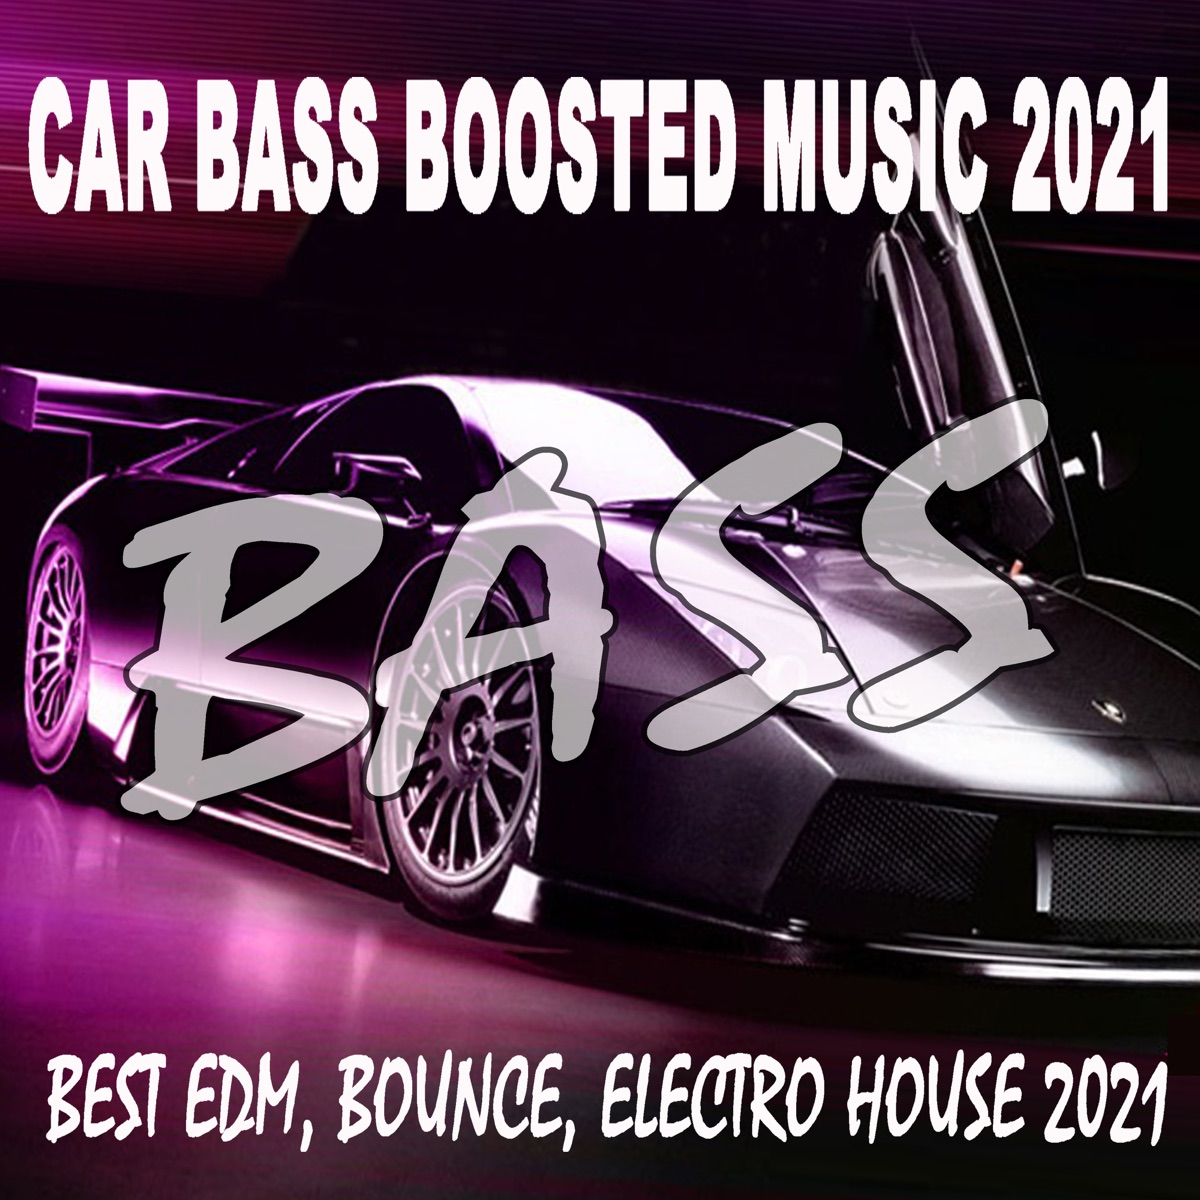 Car Bass Boosted Music 2021 ( Best EDM, Bounce, Electro House 2021 - Songs  for Car 2021 & Car Bass Music 2021) - Album by Various Artists - Apple Music